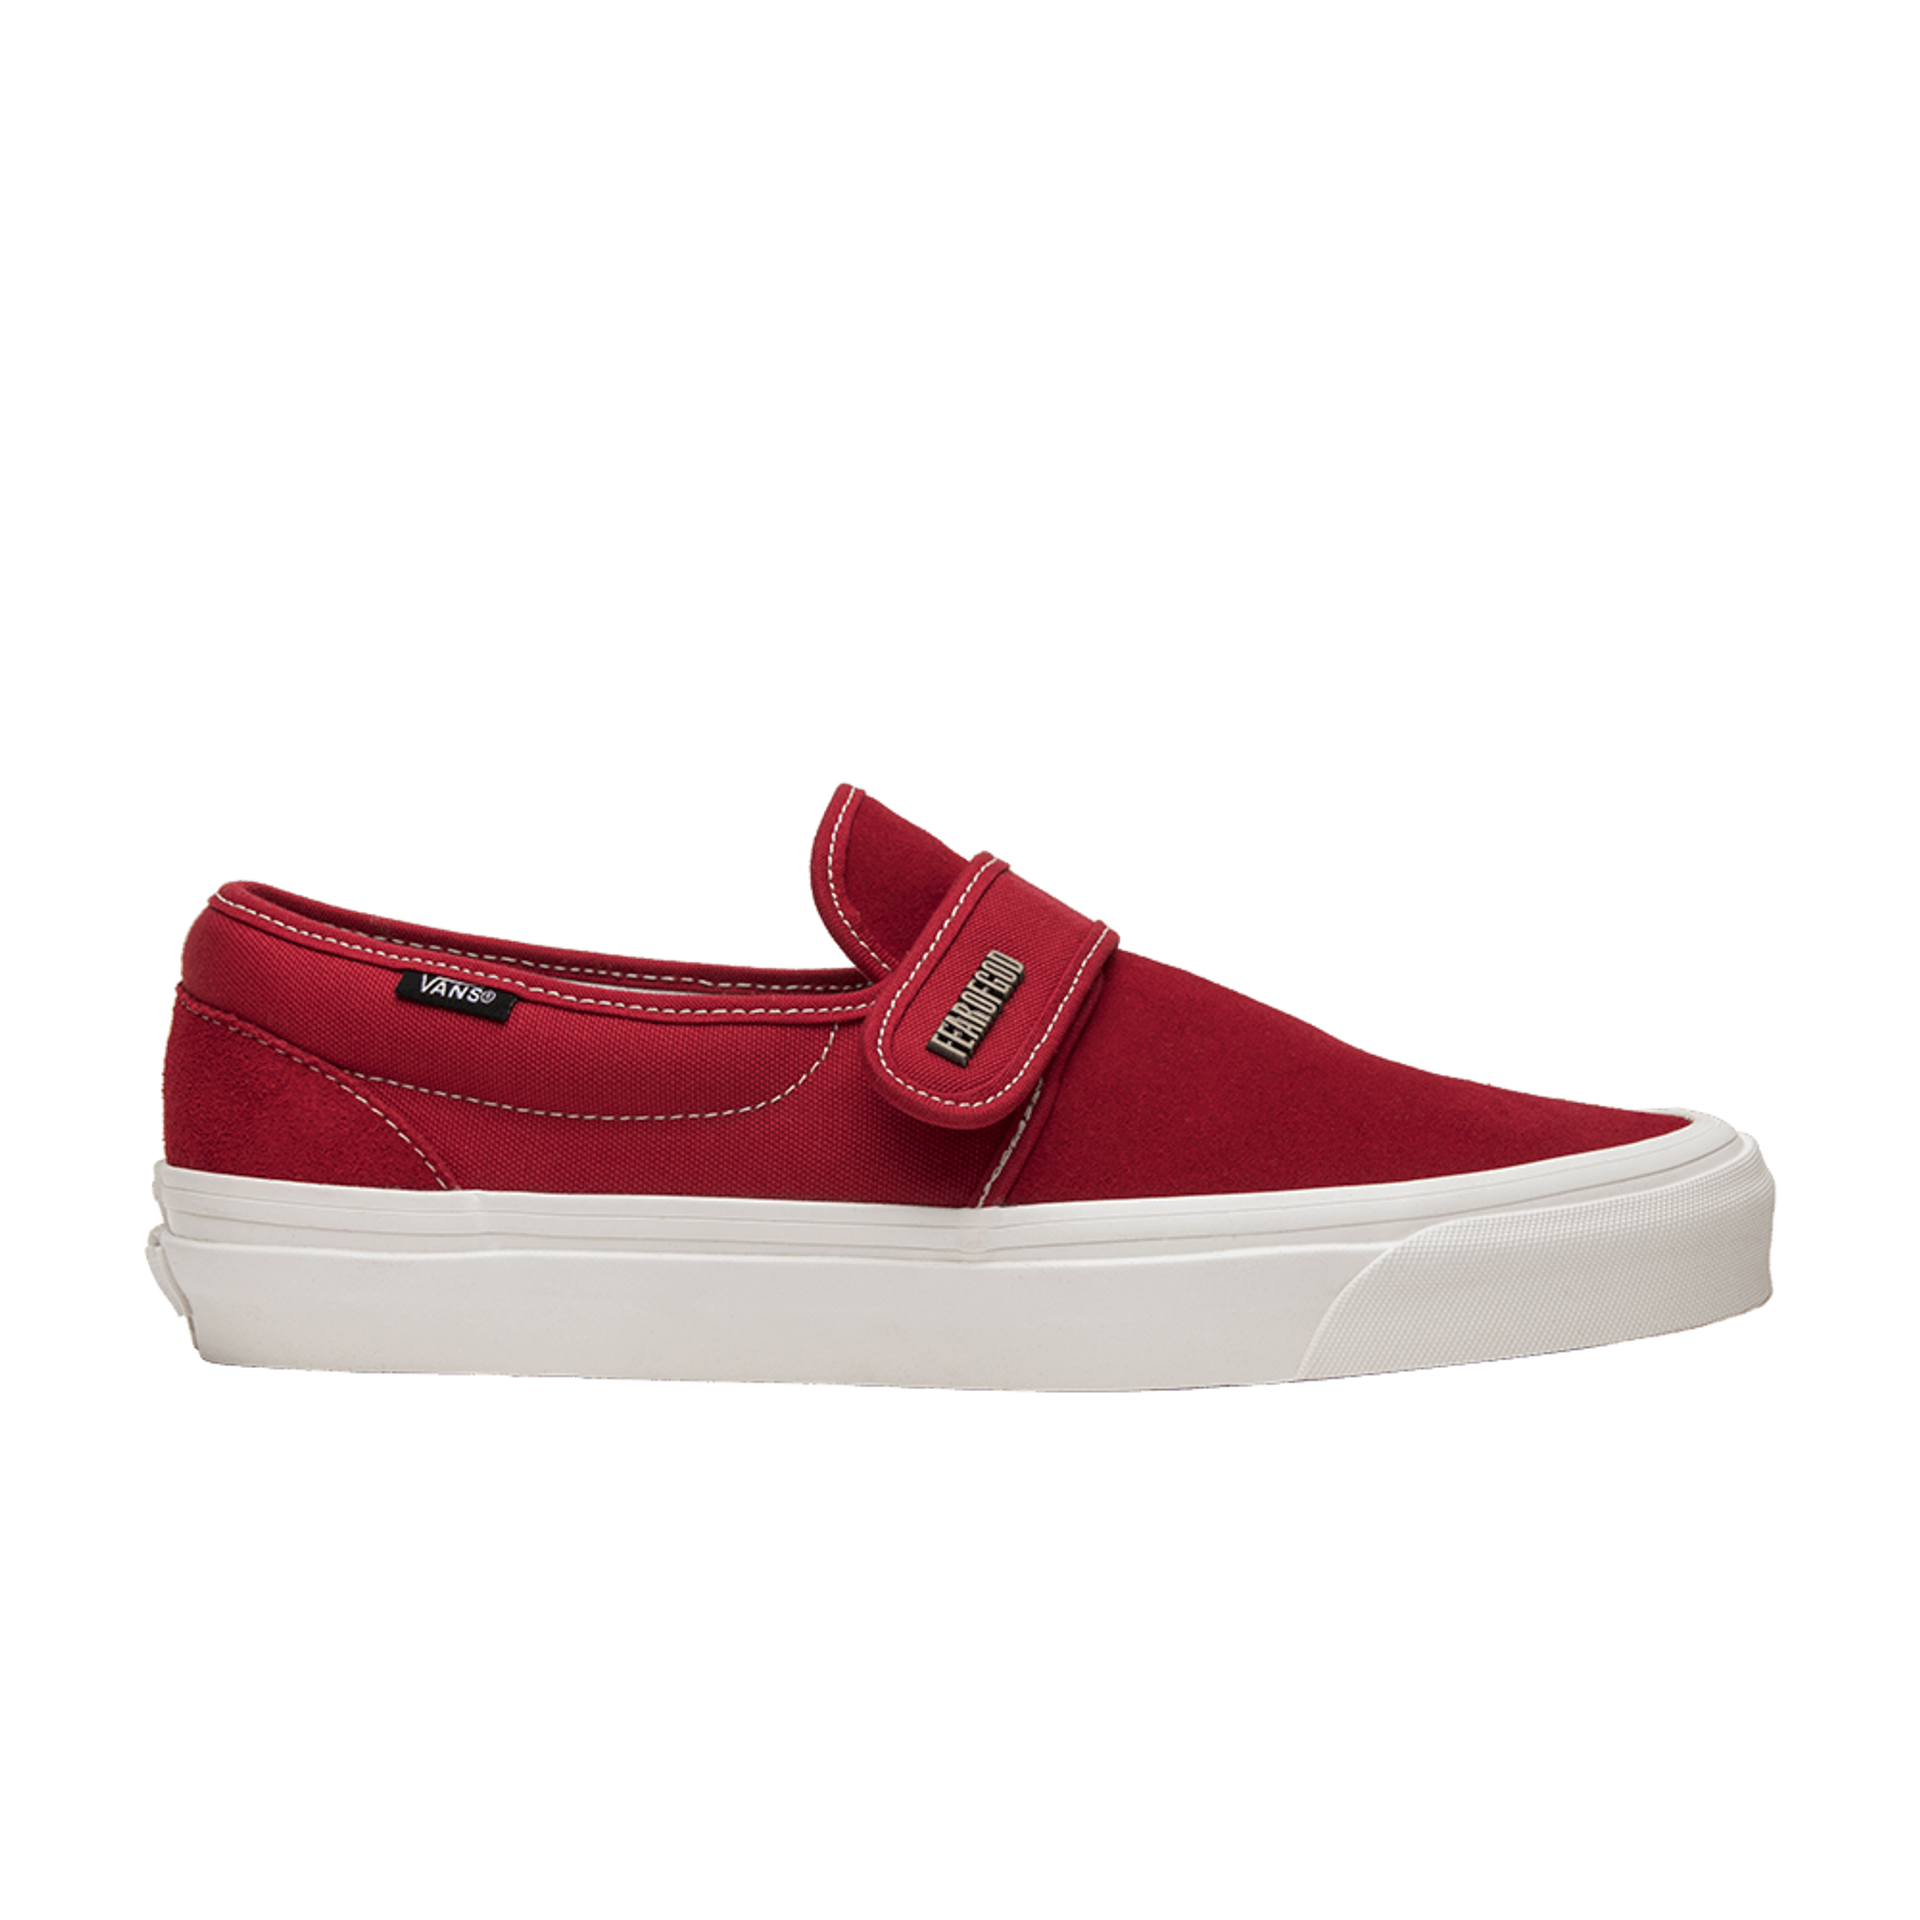 Vans Fear of God x Slip-On 47 DX 'Collection 2 Red'